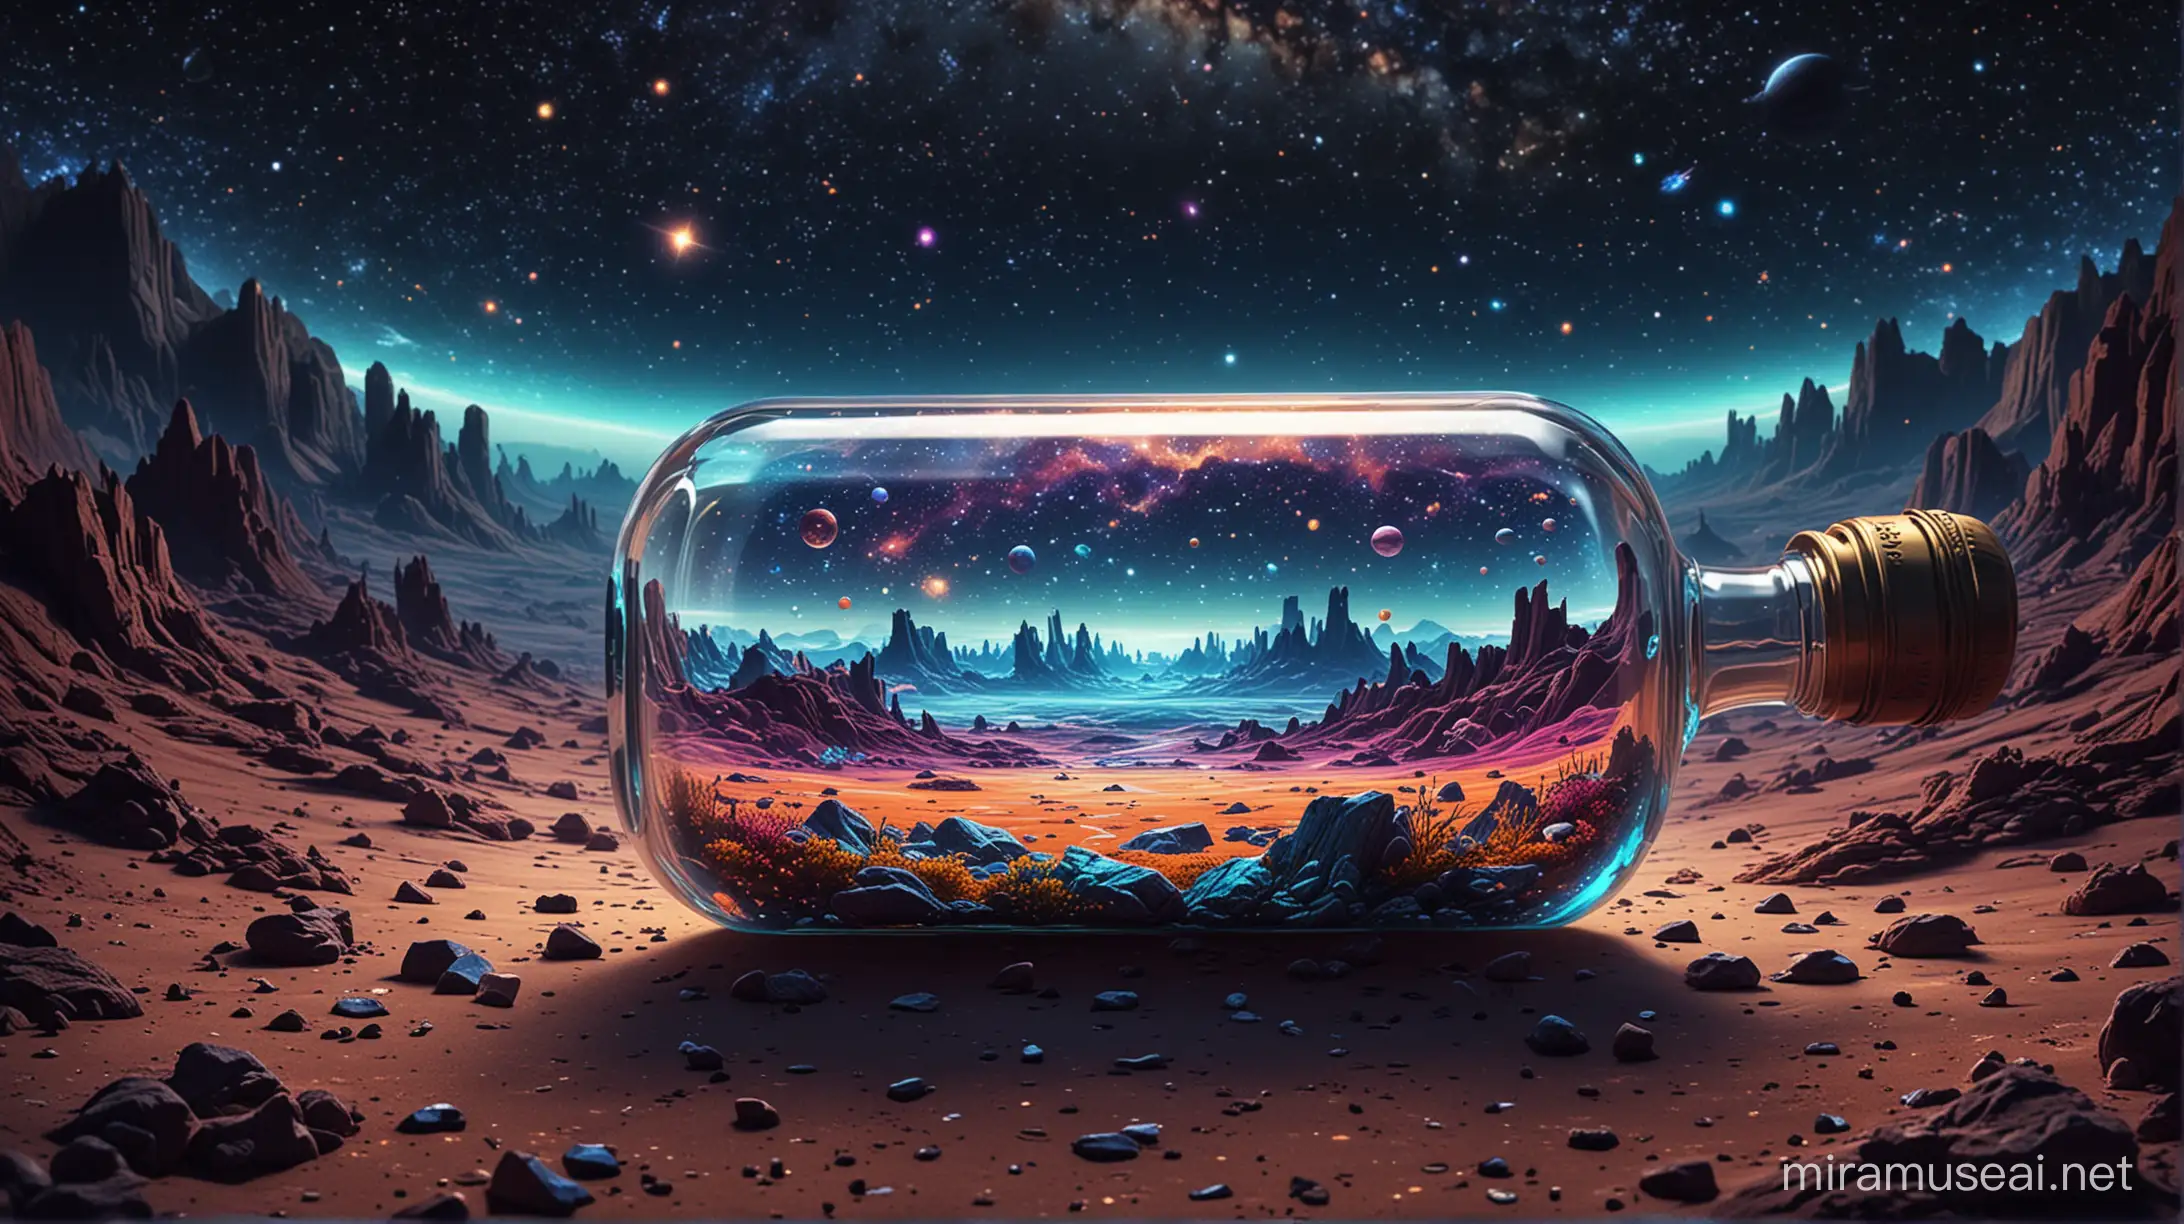 Neon Glass Bottle Floating in Space with Vibrant Landscape